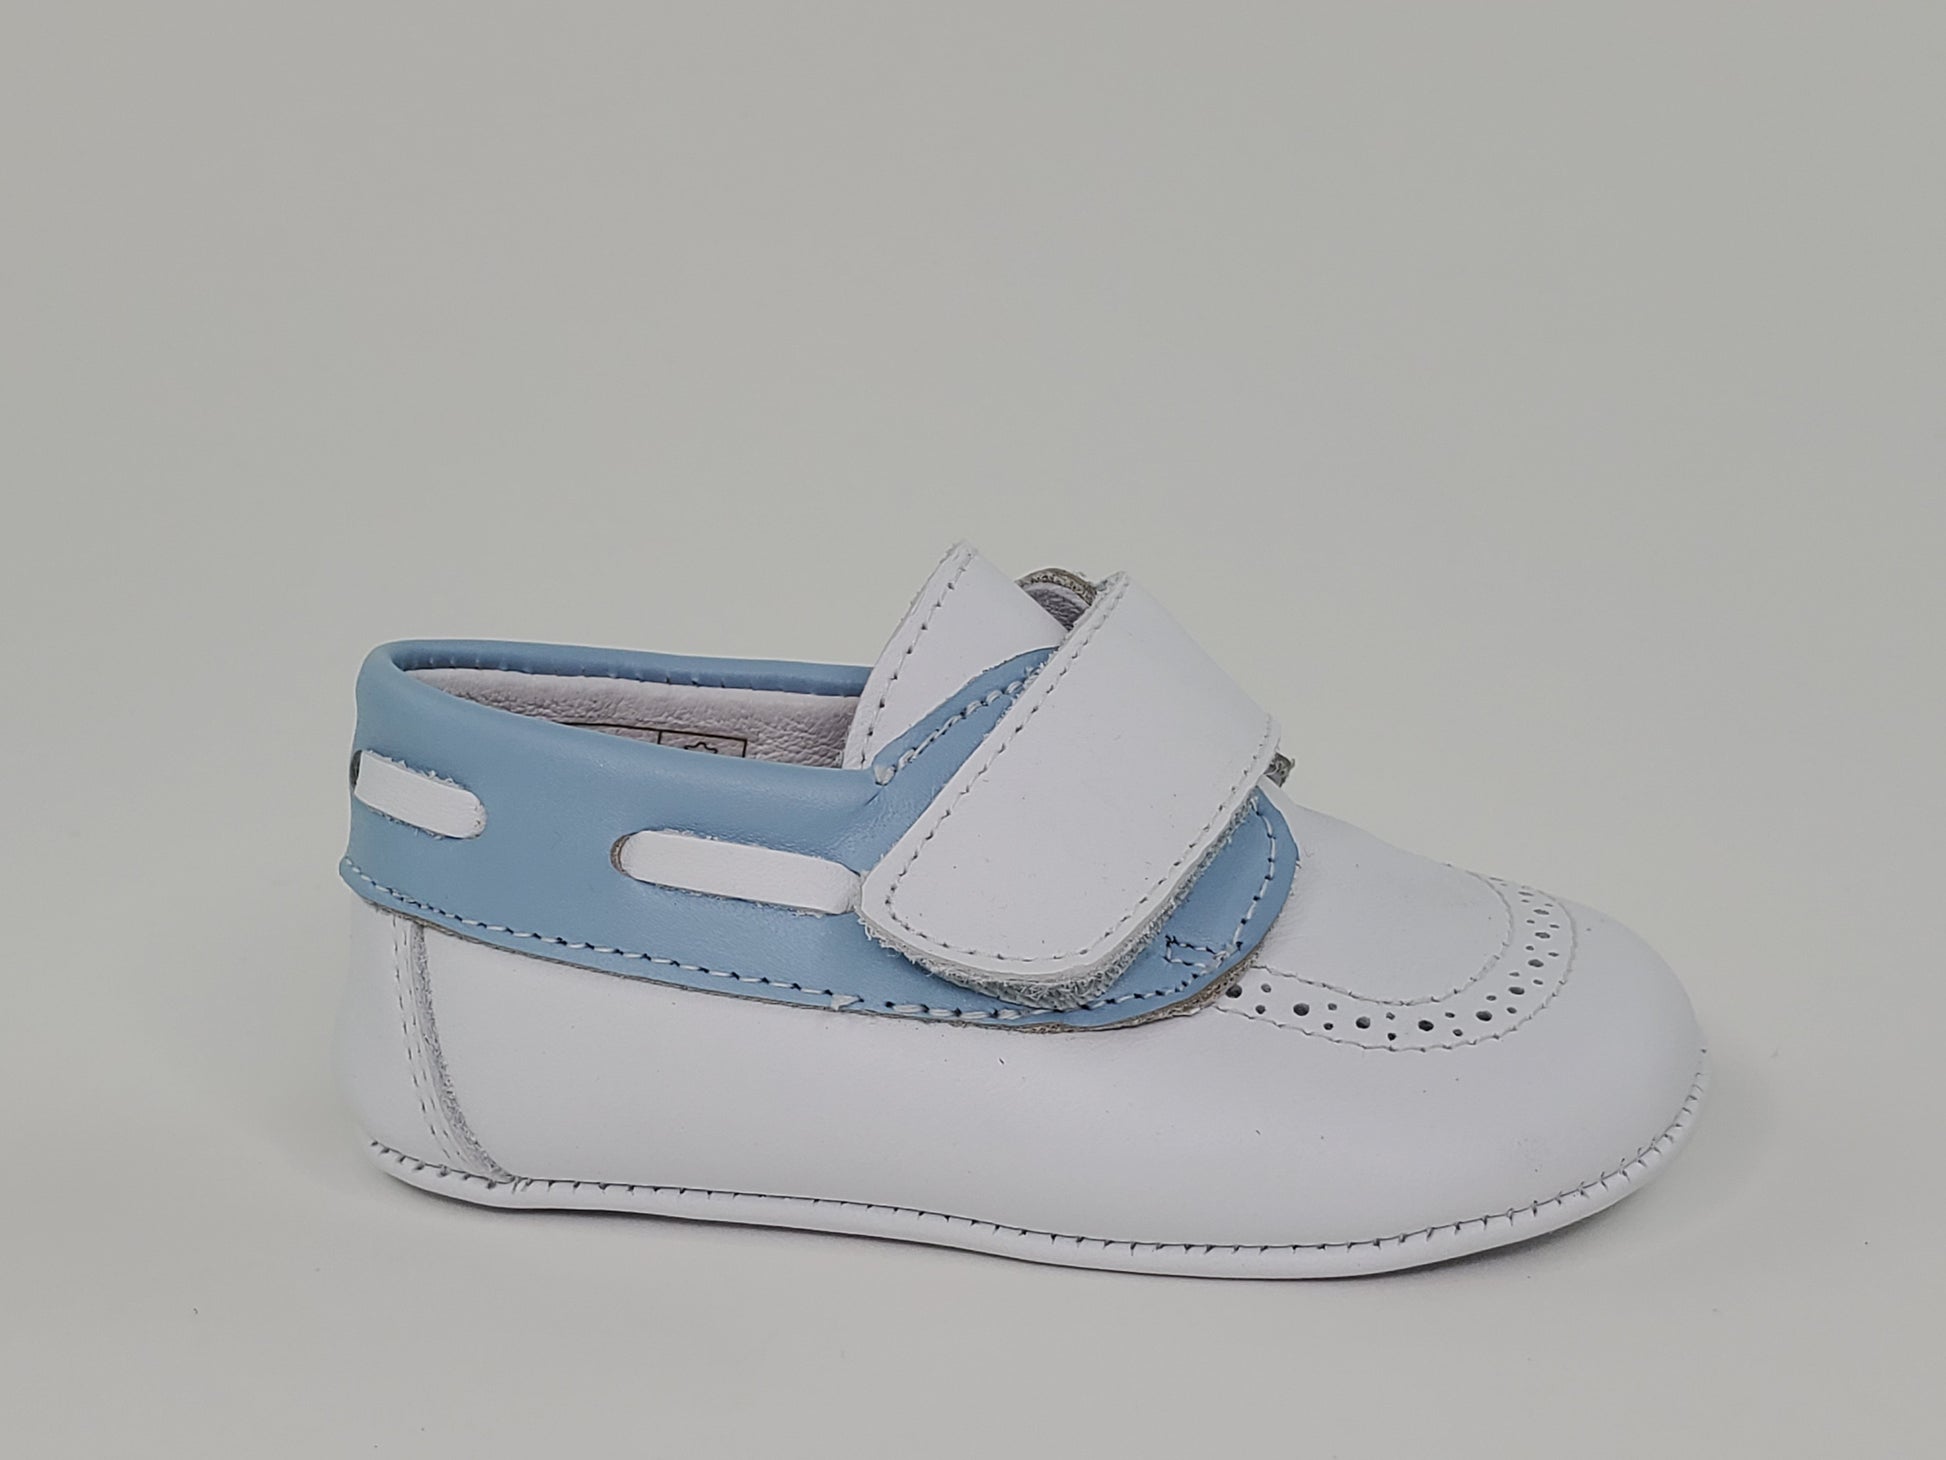 Napa white and Sky Blue Pre-walker Shoes-Toddler Boy Shoes Boys Shoes Alfa Baby Boutique 